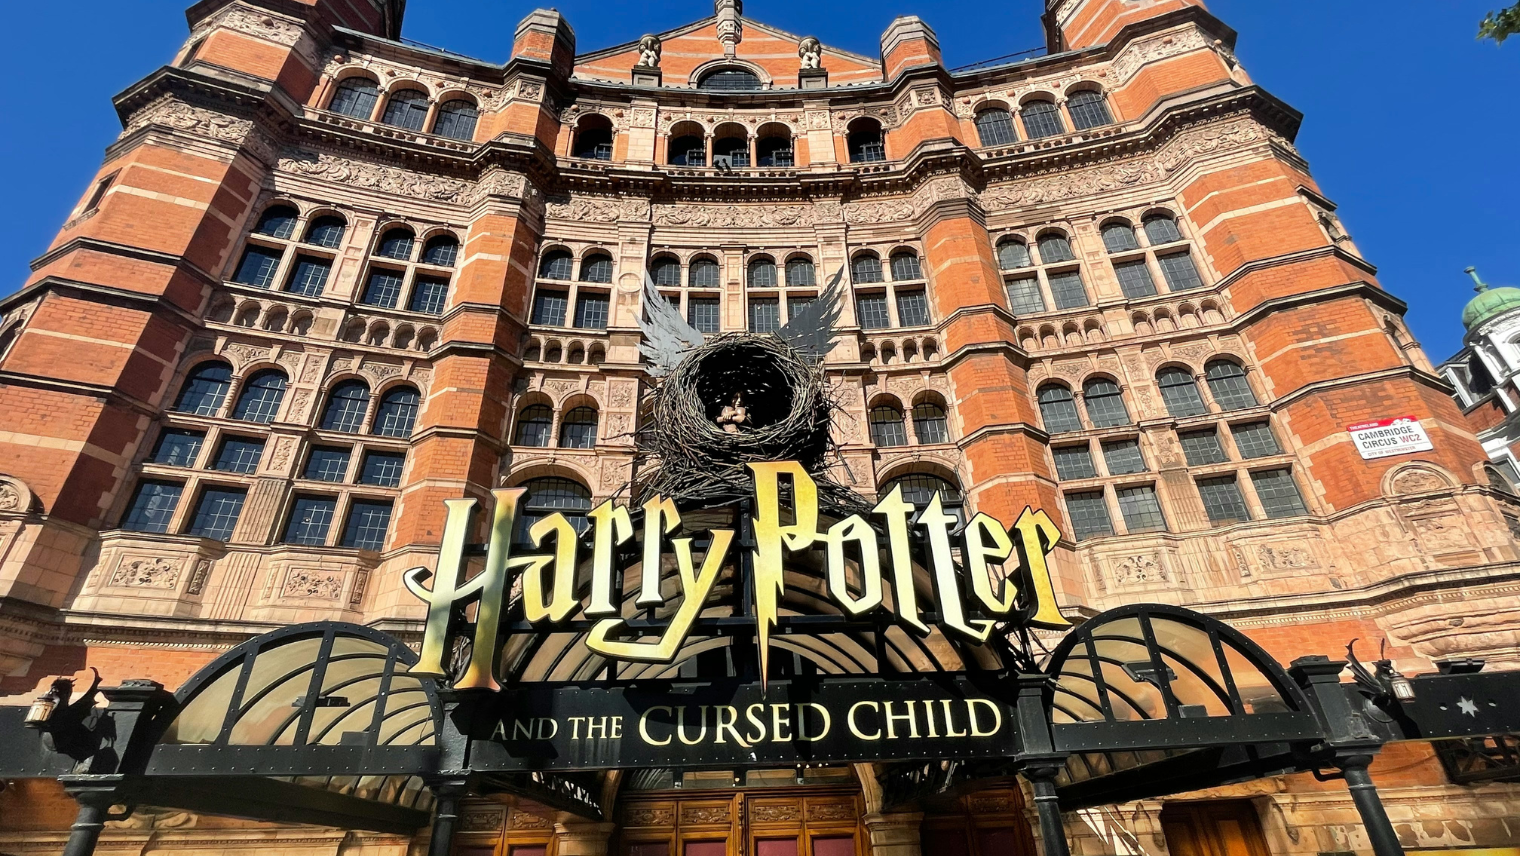 Harry Potter and the Cursed Child theatre building